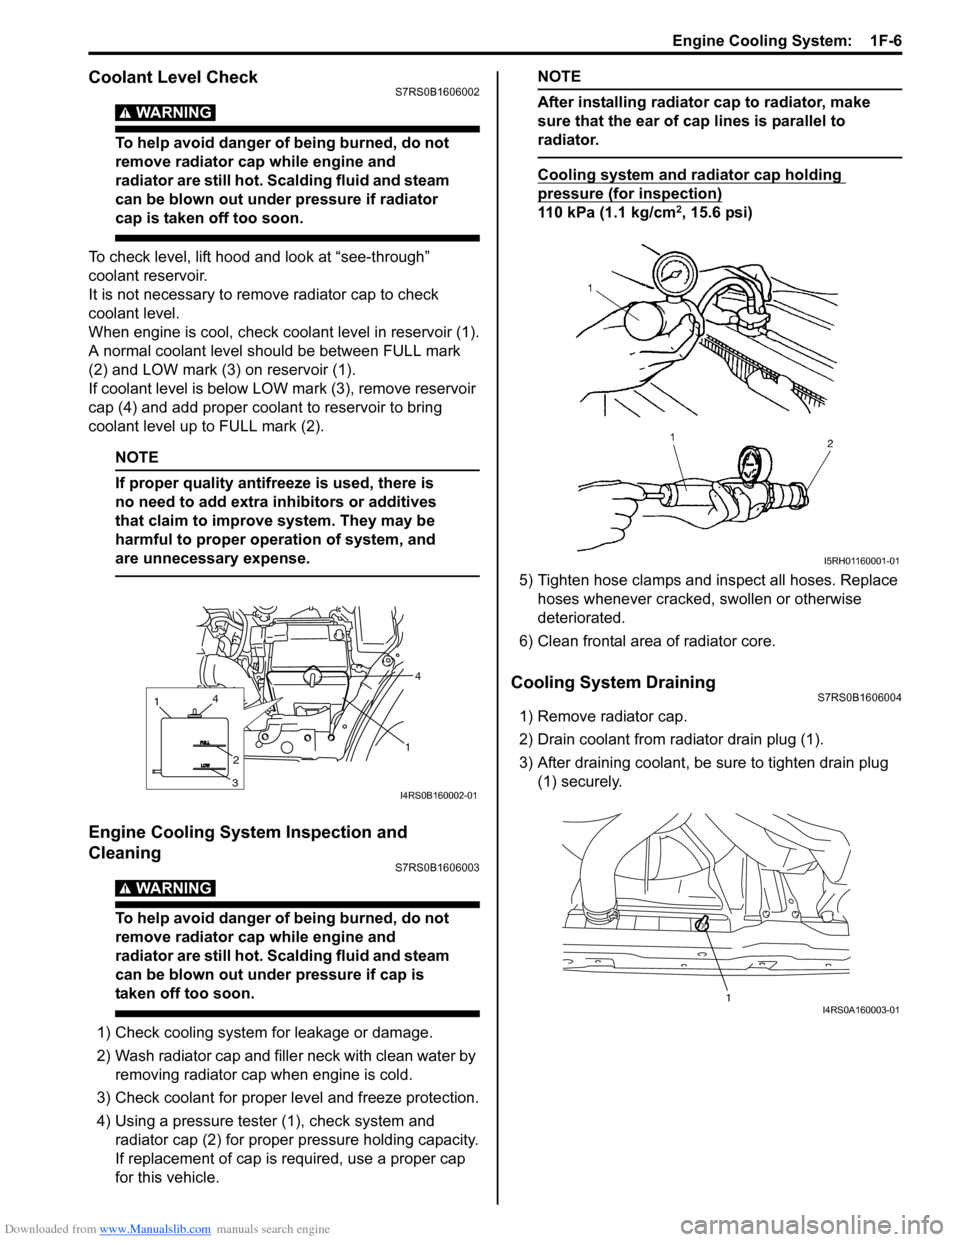 SUZUKI SWIFT 2008 2.G Service Repair Manual Downloaded from www.Manualslib.com manuals search engine Engine Cooling System:  1F-6
Coolant Level CheckS7RS0B1606002
WARNING! 
To help avoid danger of being burned, do not 
remove radiator cap while